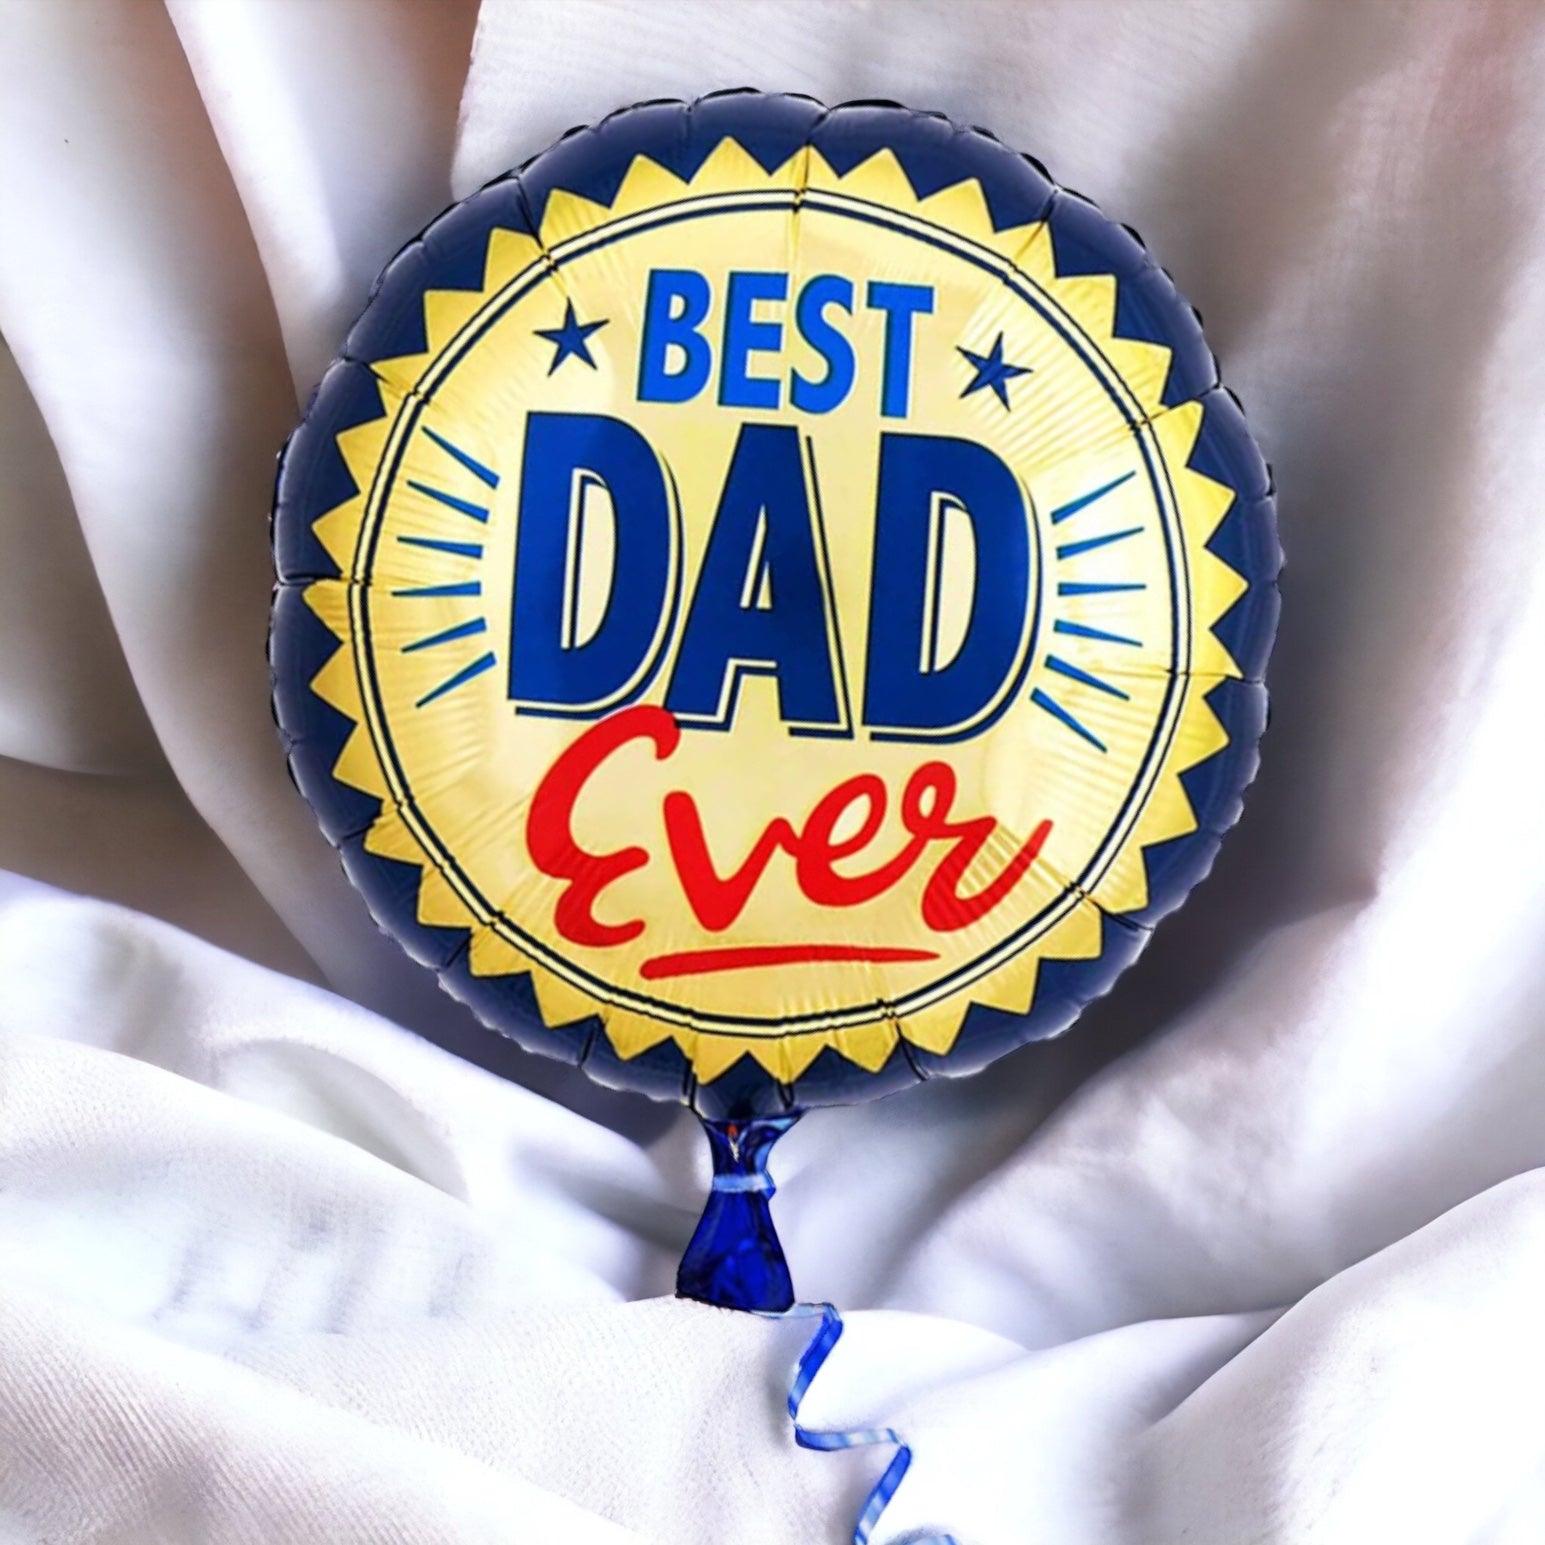 Best Dad Ever Balloon - Treats & Sweets